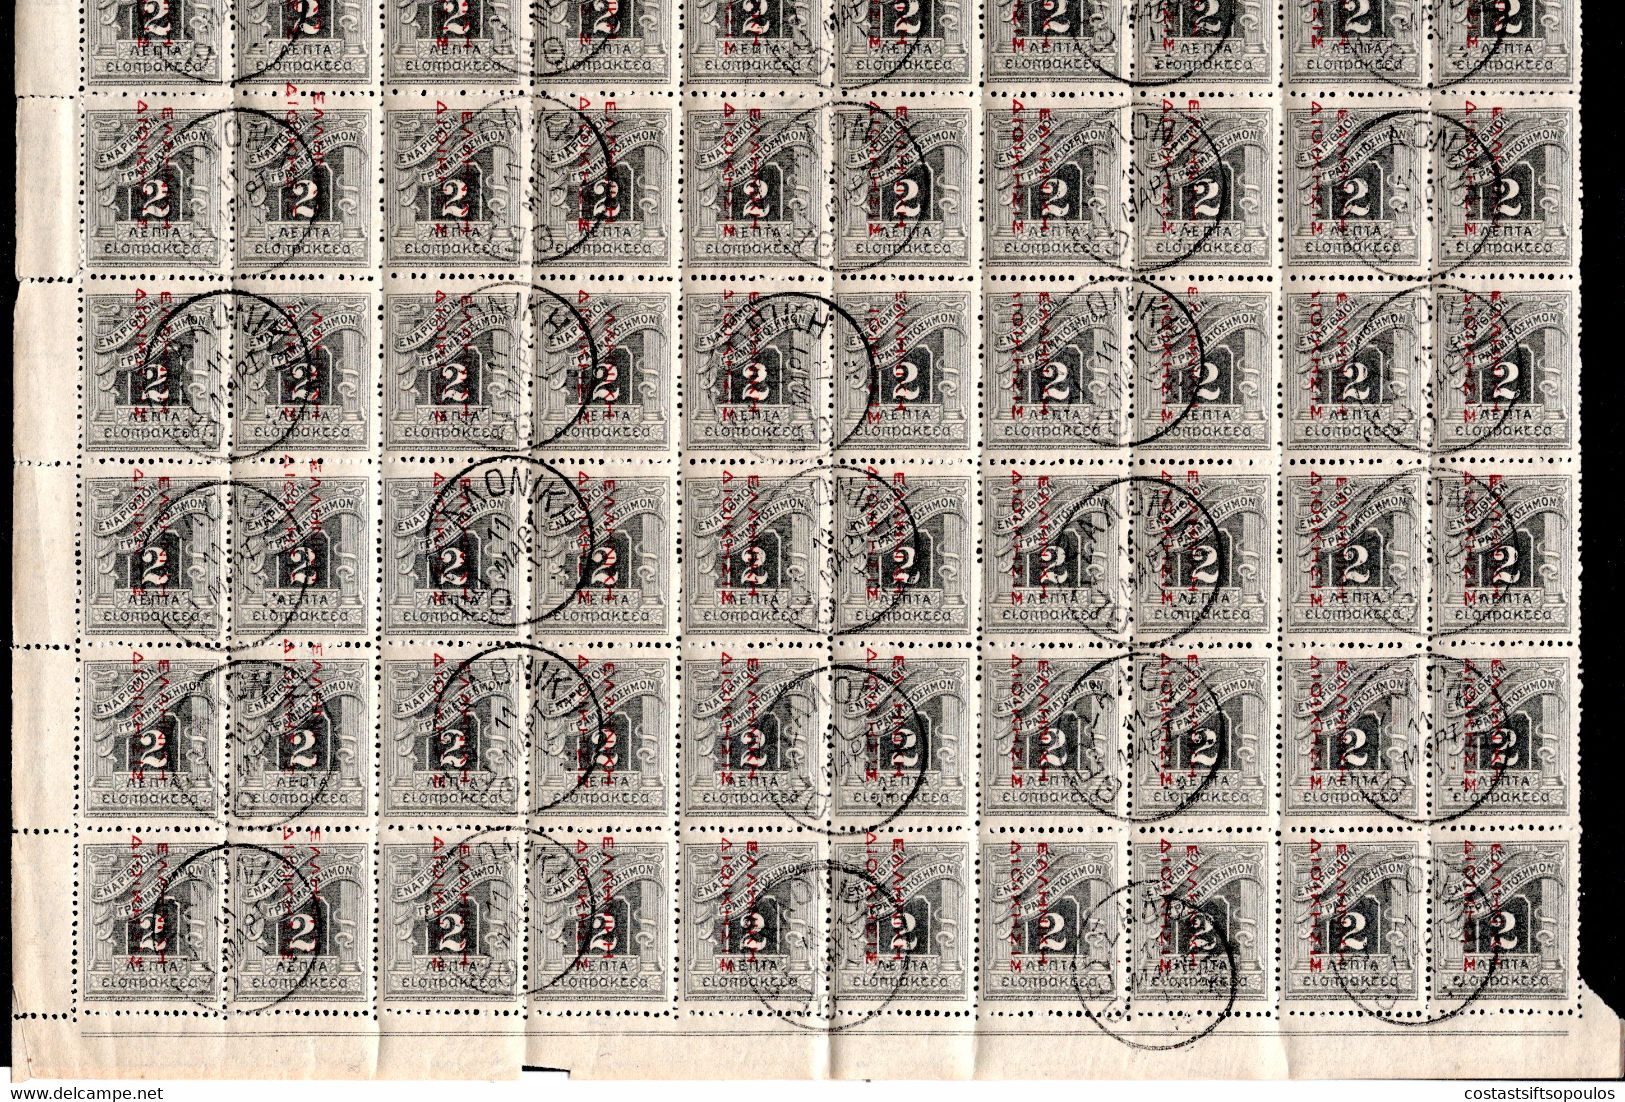 301.GREECE.1912 HELLAS D76 AND VARIETIES,HELLENIC ADM.2L.SHEET OF 100 C.T.O. SALONIQUE,CATALOGUE VALUE OVER EURO 1000 - Usati